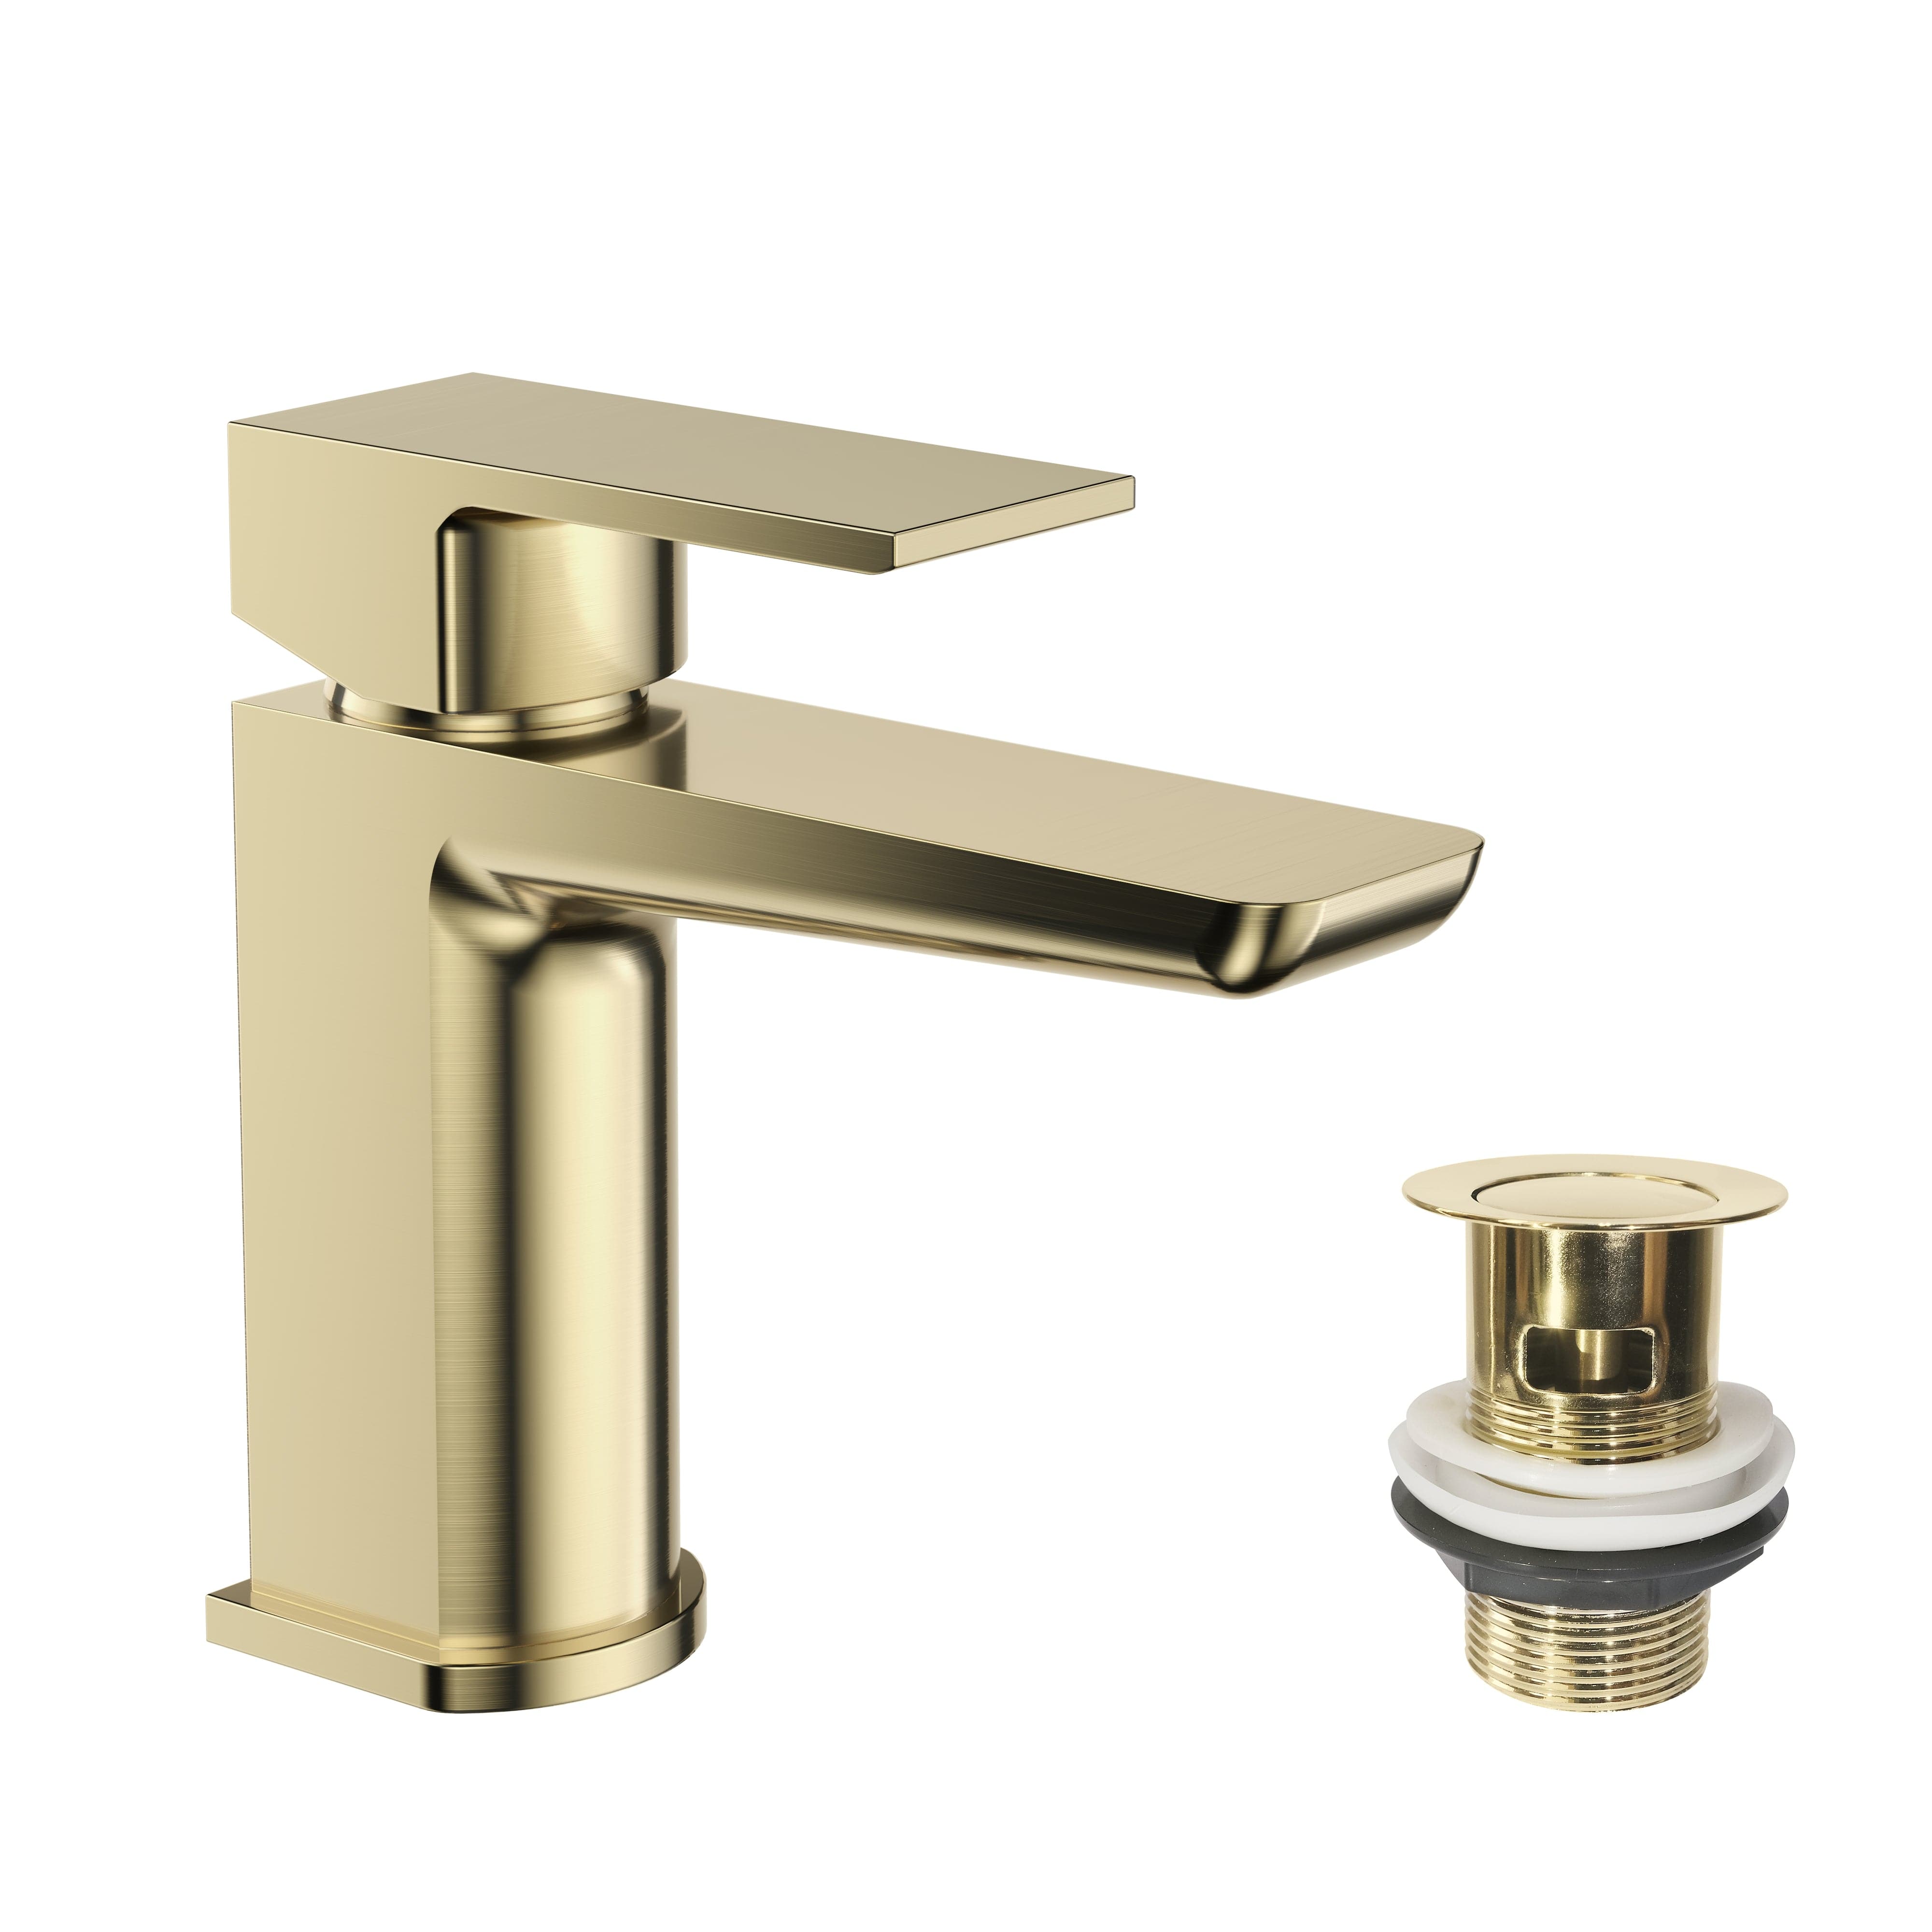 Modern Lunar Soft Square Mono Basin Mixer Tap in Brushed Brass, stylish bathroom fittings, water-saving design, UK home decor essentials.